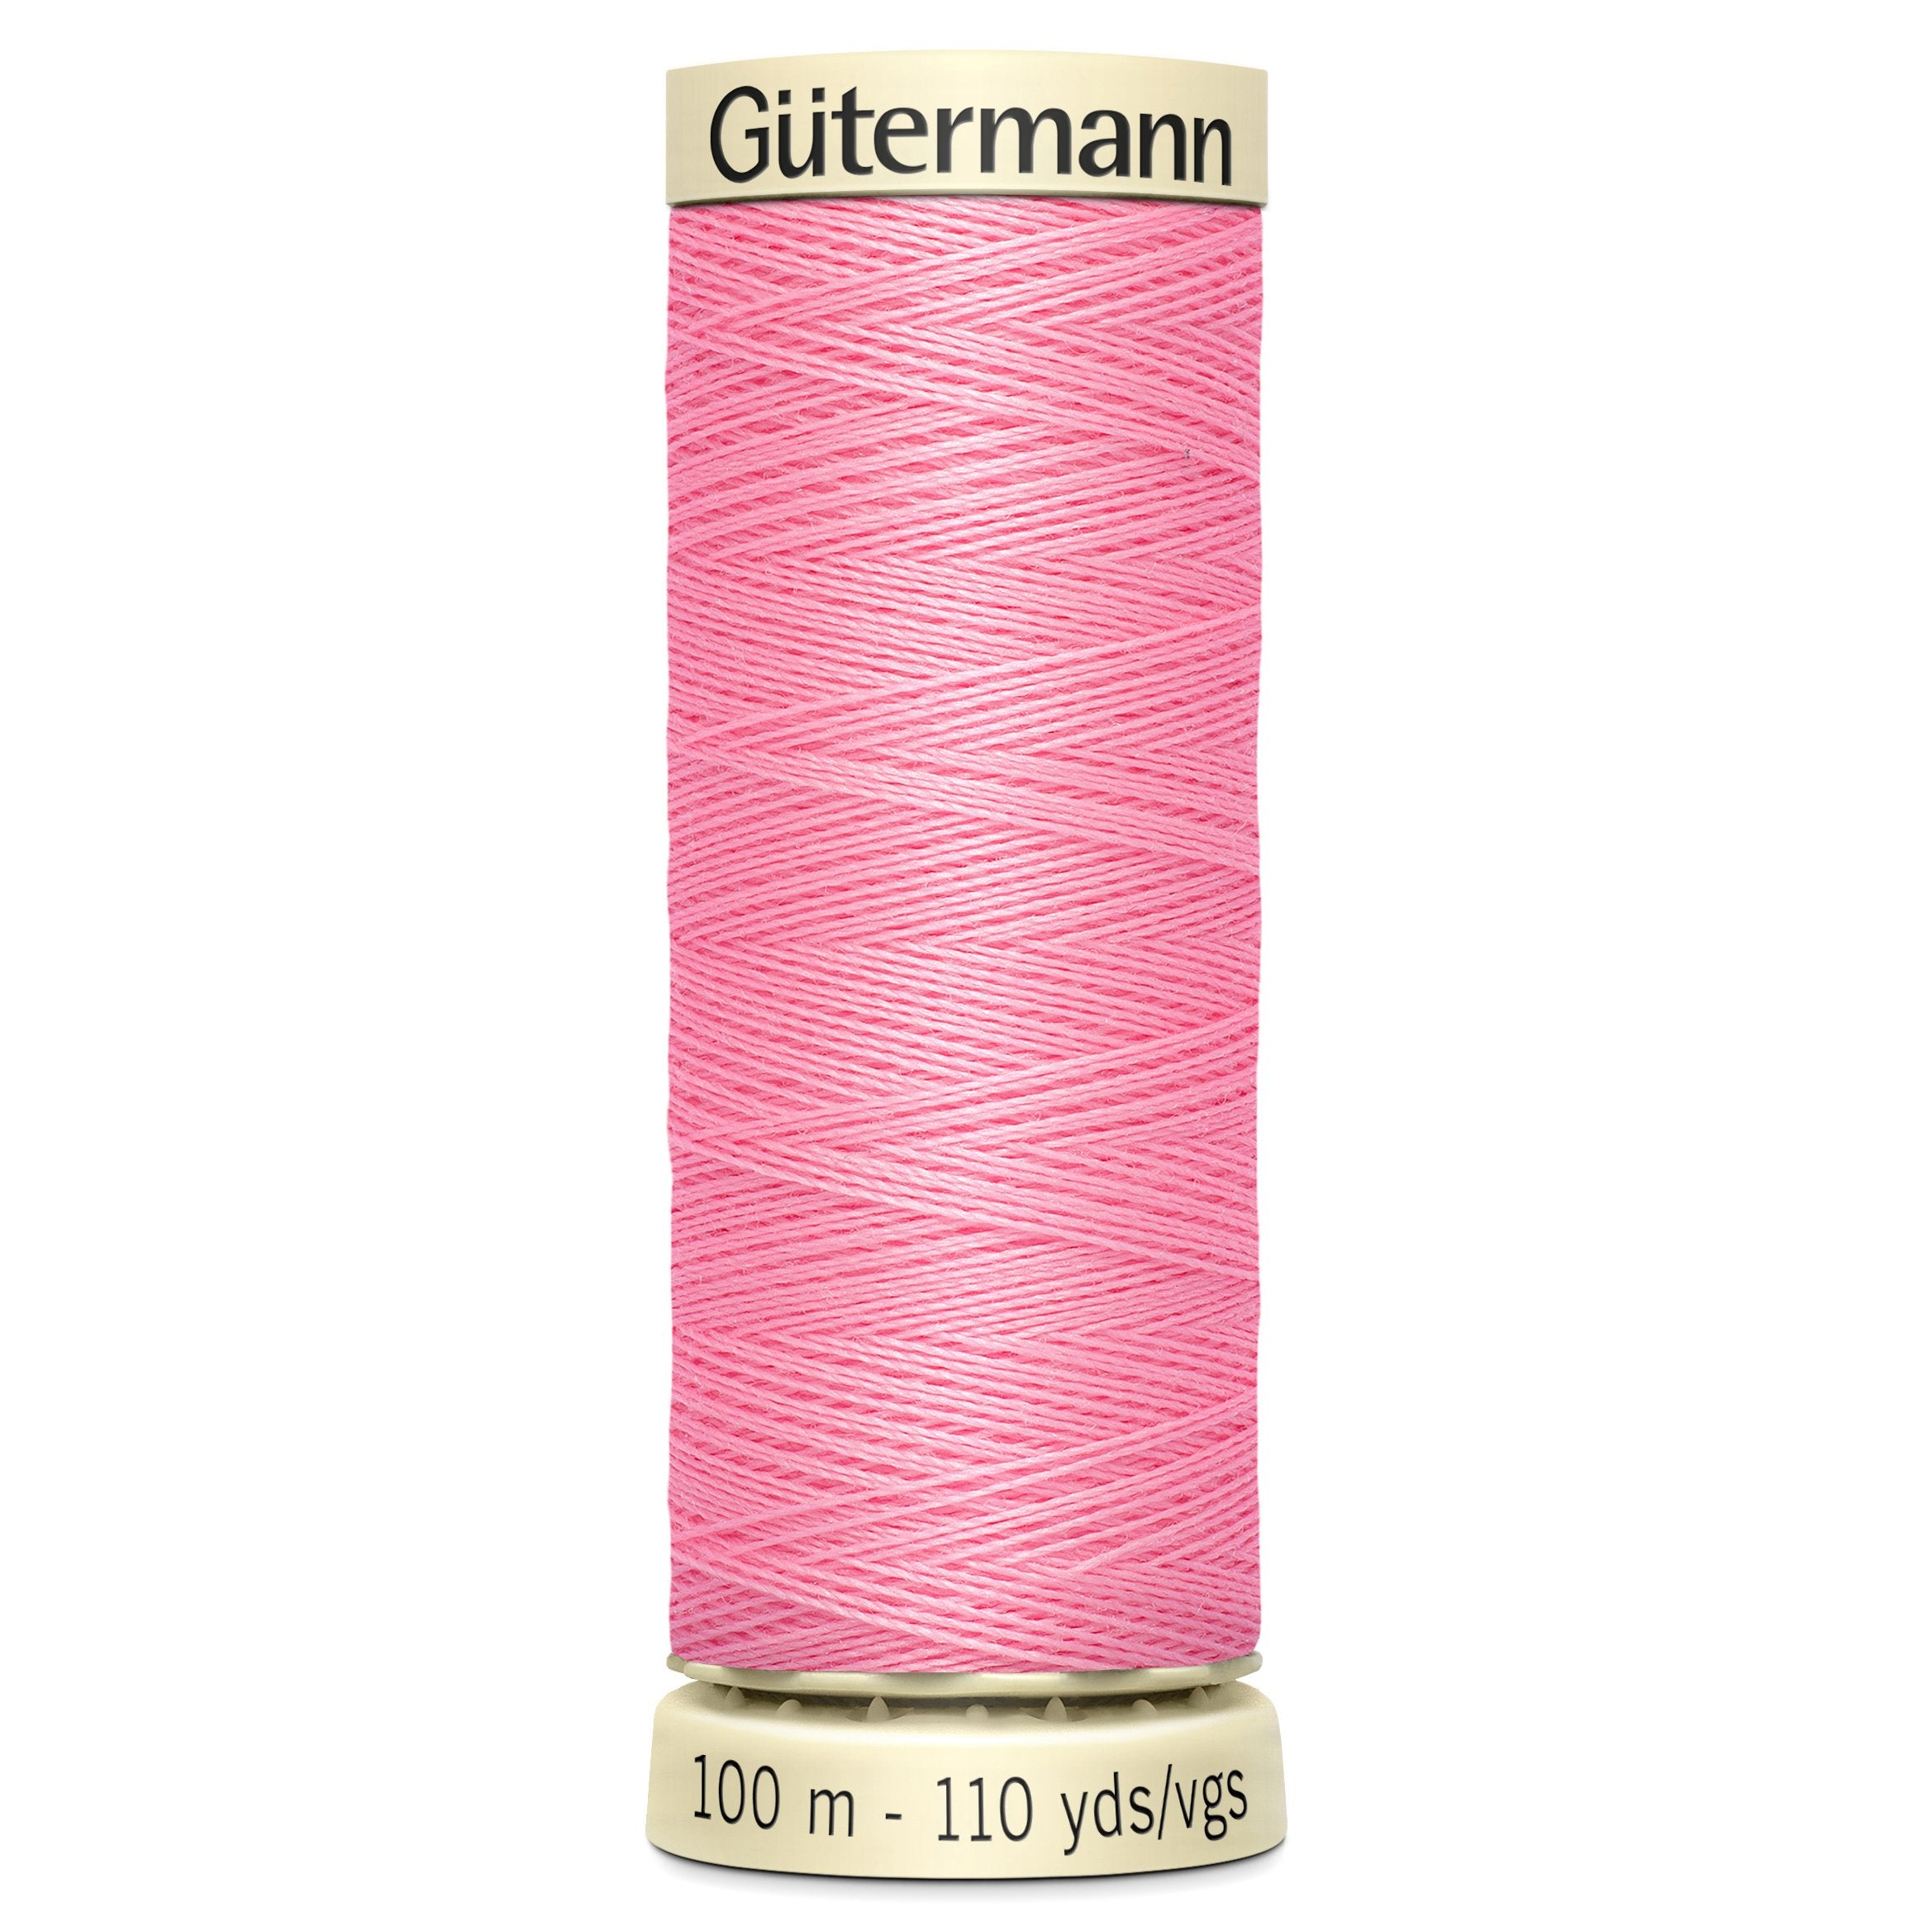 Gutermann Sew All Thread colour 758 Pink from Jaycotts Sewing Supplies